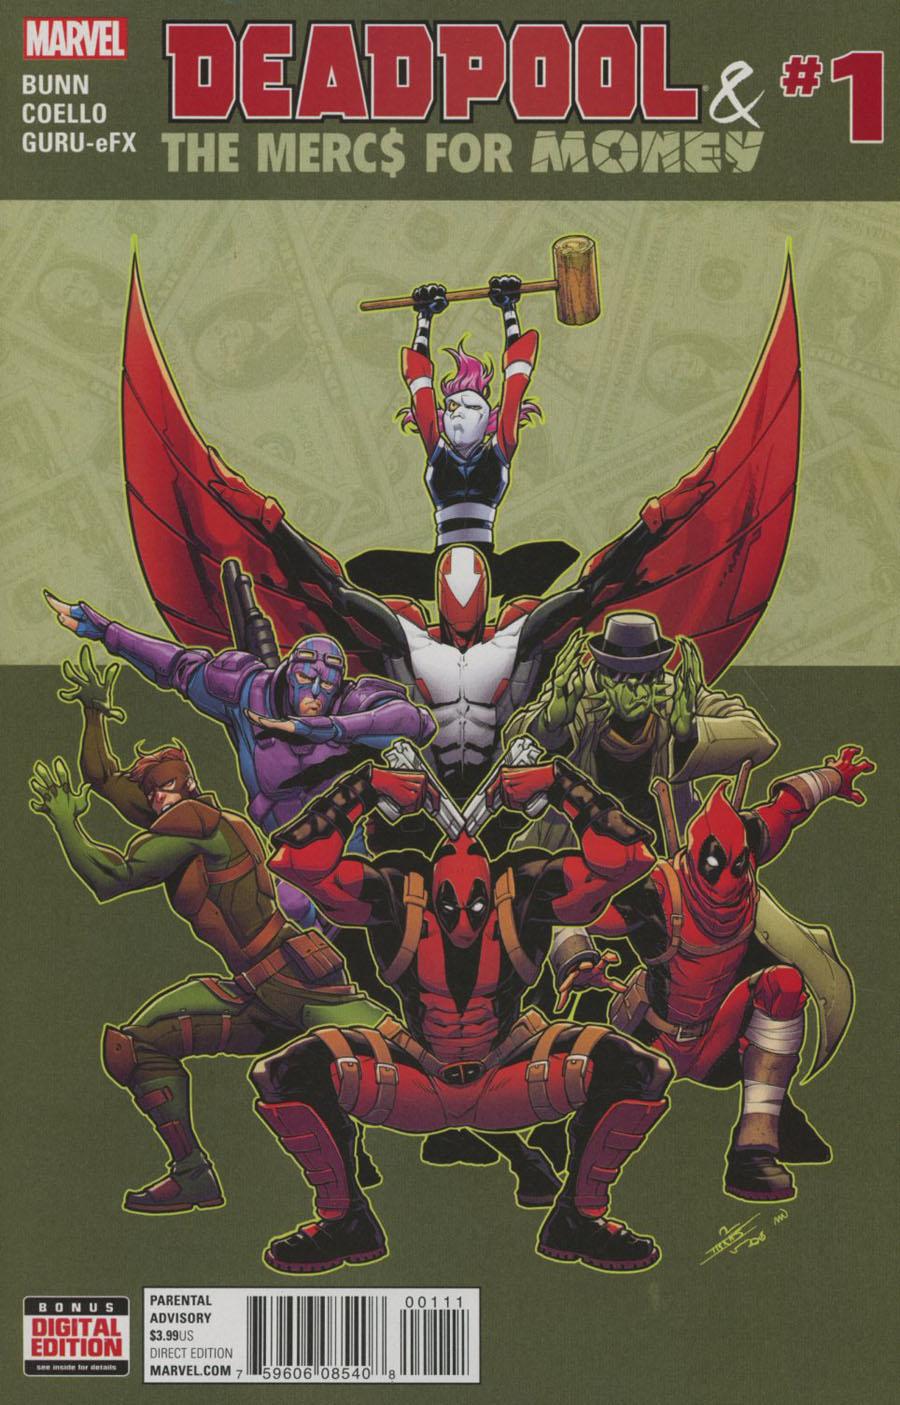 Deadpool And The Mercs For Money Vol. 2 #1